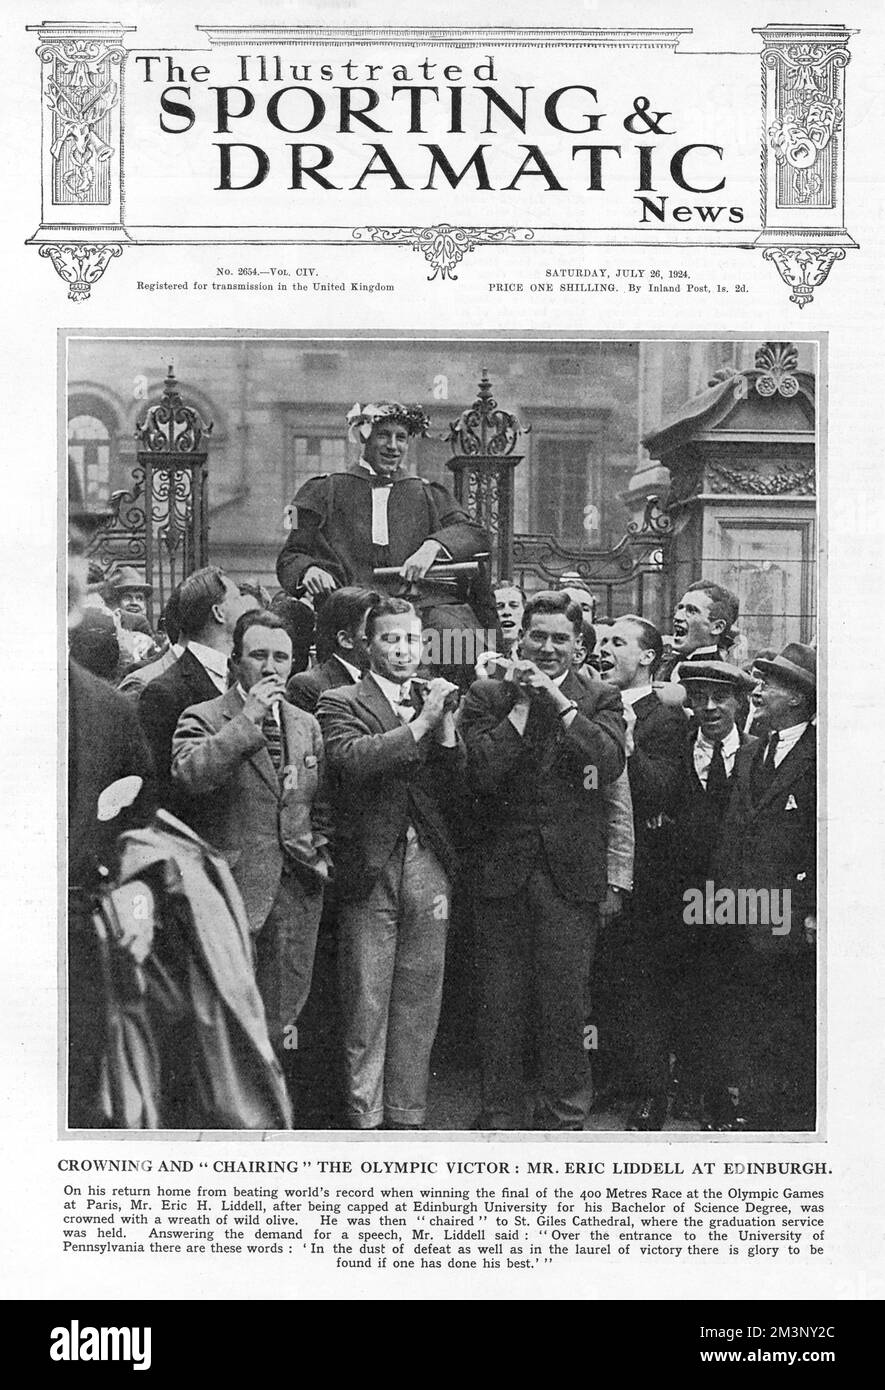 Eric Liddell, the 400m gold medallist at the 1924 Paris Olympic Games, crowned and 'chaired' at Edinburgh University where he had studied science.  Wearing a wreath of olive leaves, he is carried by fellow graduates on a chair to St. Giles Cathedral where the graduation service was held.  Answering the demand for a speech, Mr Liddell said, 'Over the entrance to the University of Pennsylvania there are these words: 'In the dust of defeat as well as in the laurel of victory there is glory to be found if one has done his best.'&quot;  Eric Liddell (1902 - 1945), was a Scottish athlete, rugby unio Stock Photo